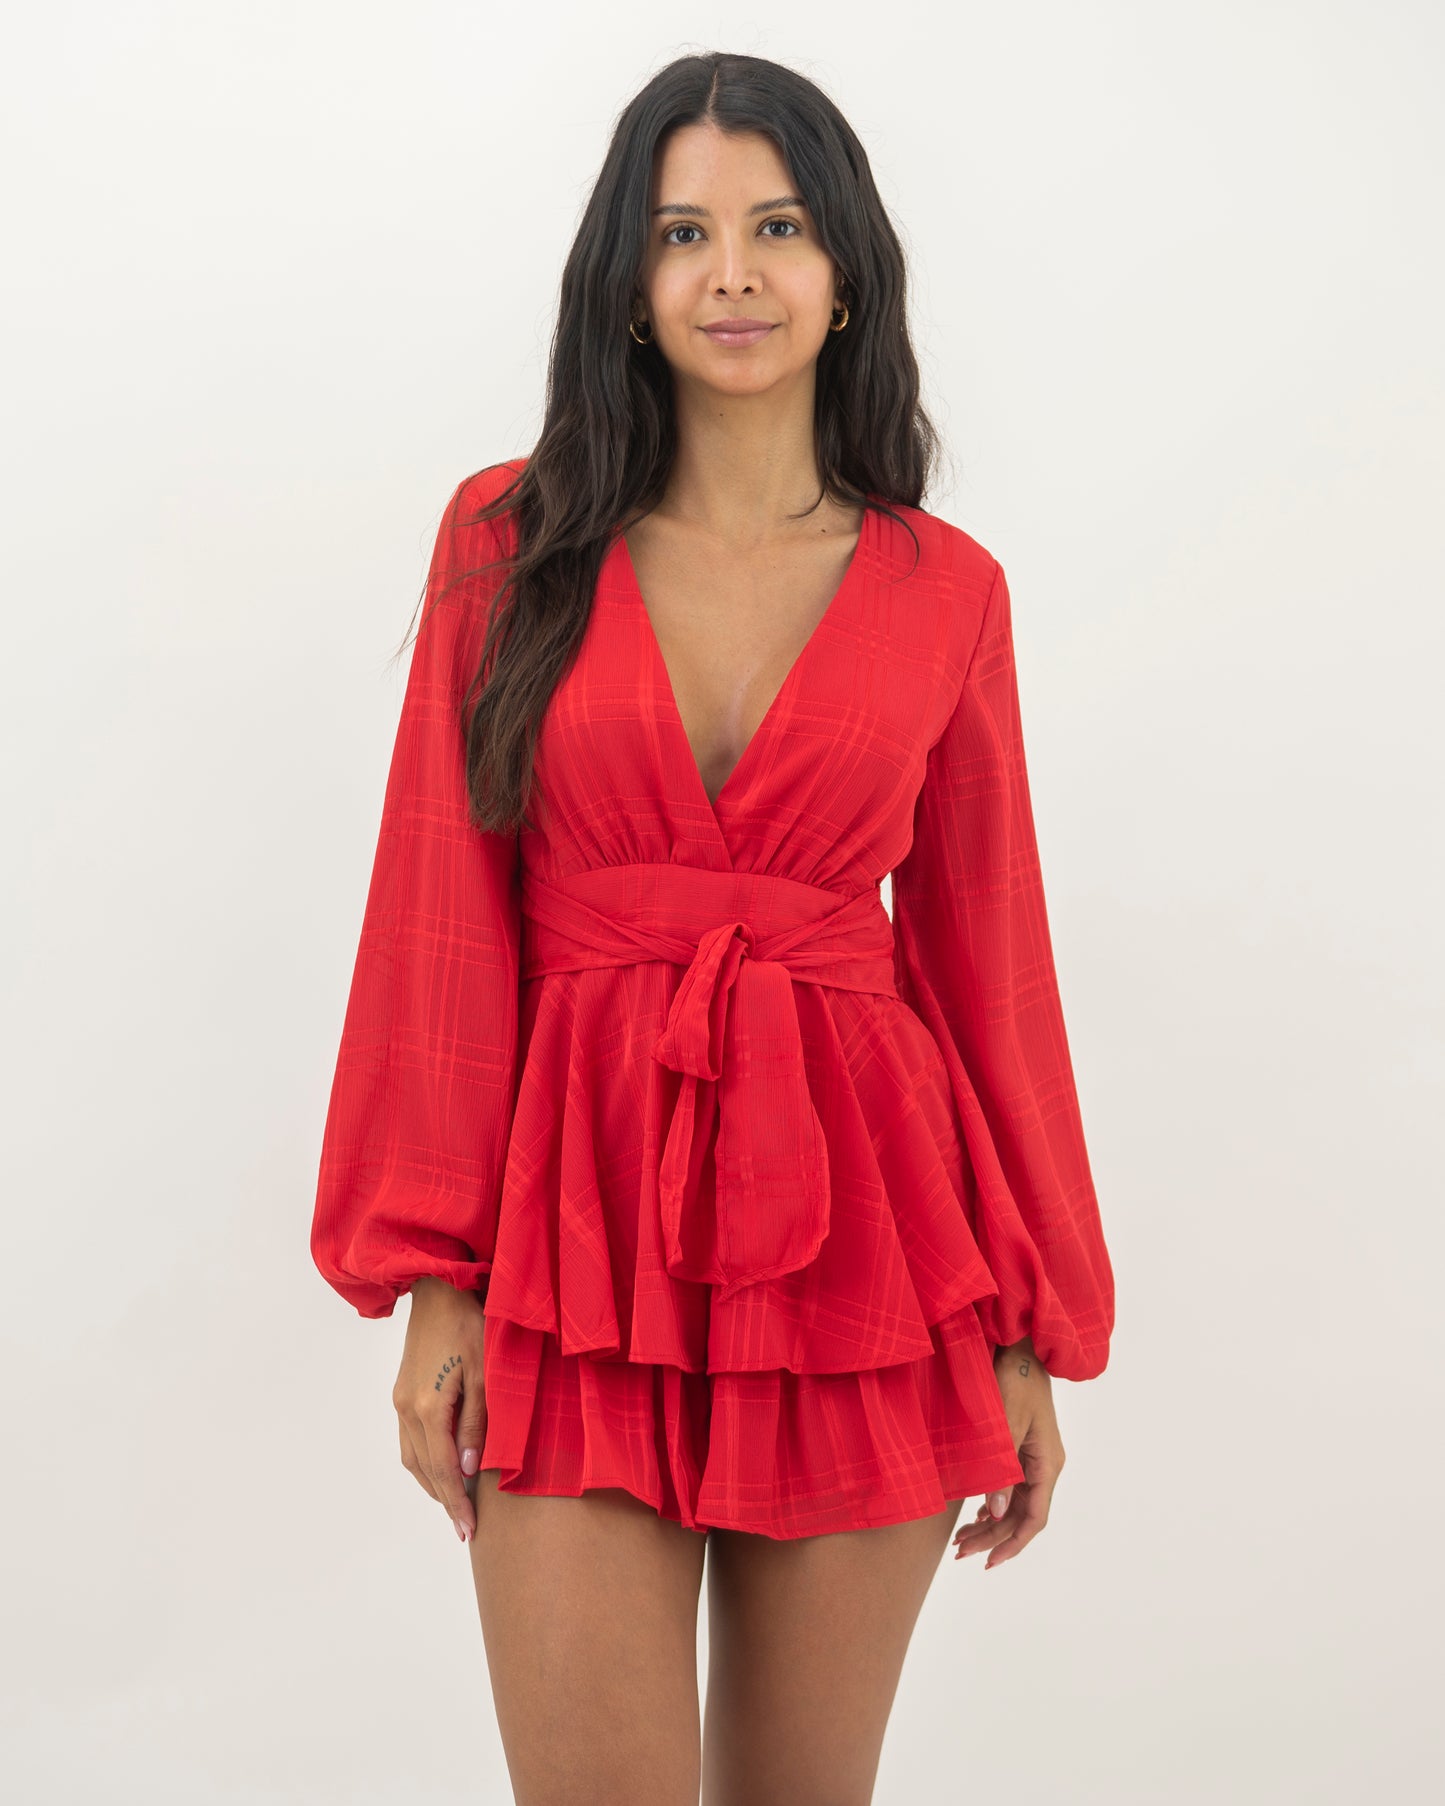 Fashion Red Checkered Ruffle Tie-Up Romper with Bell Sleeve